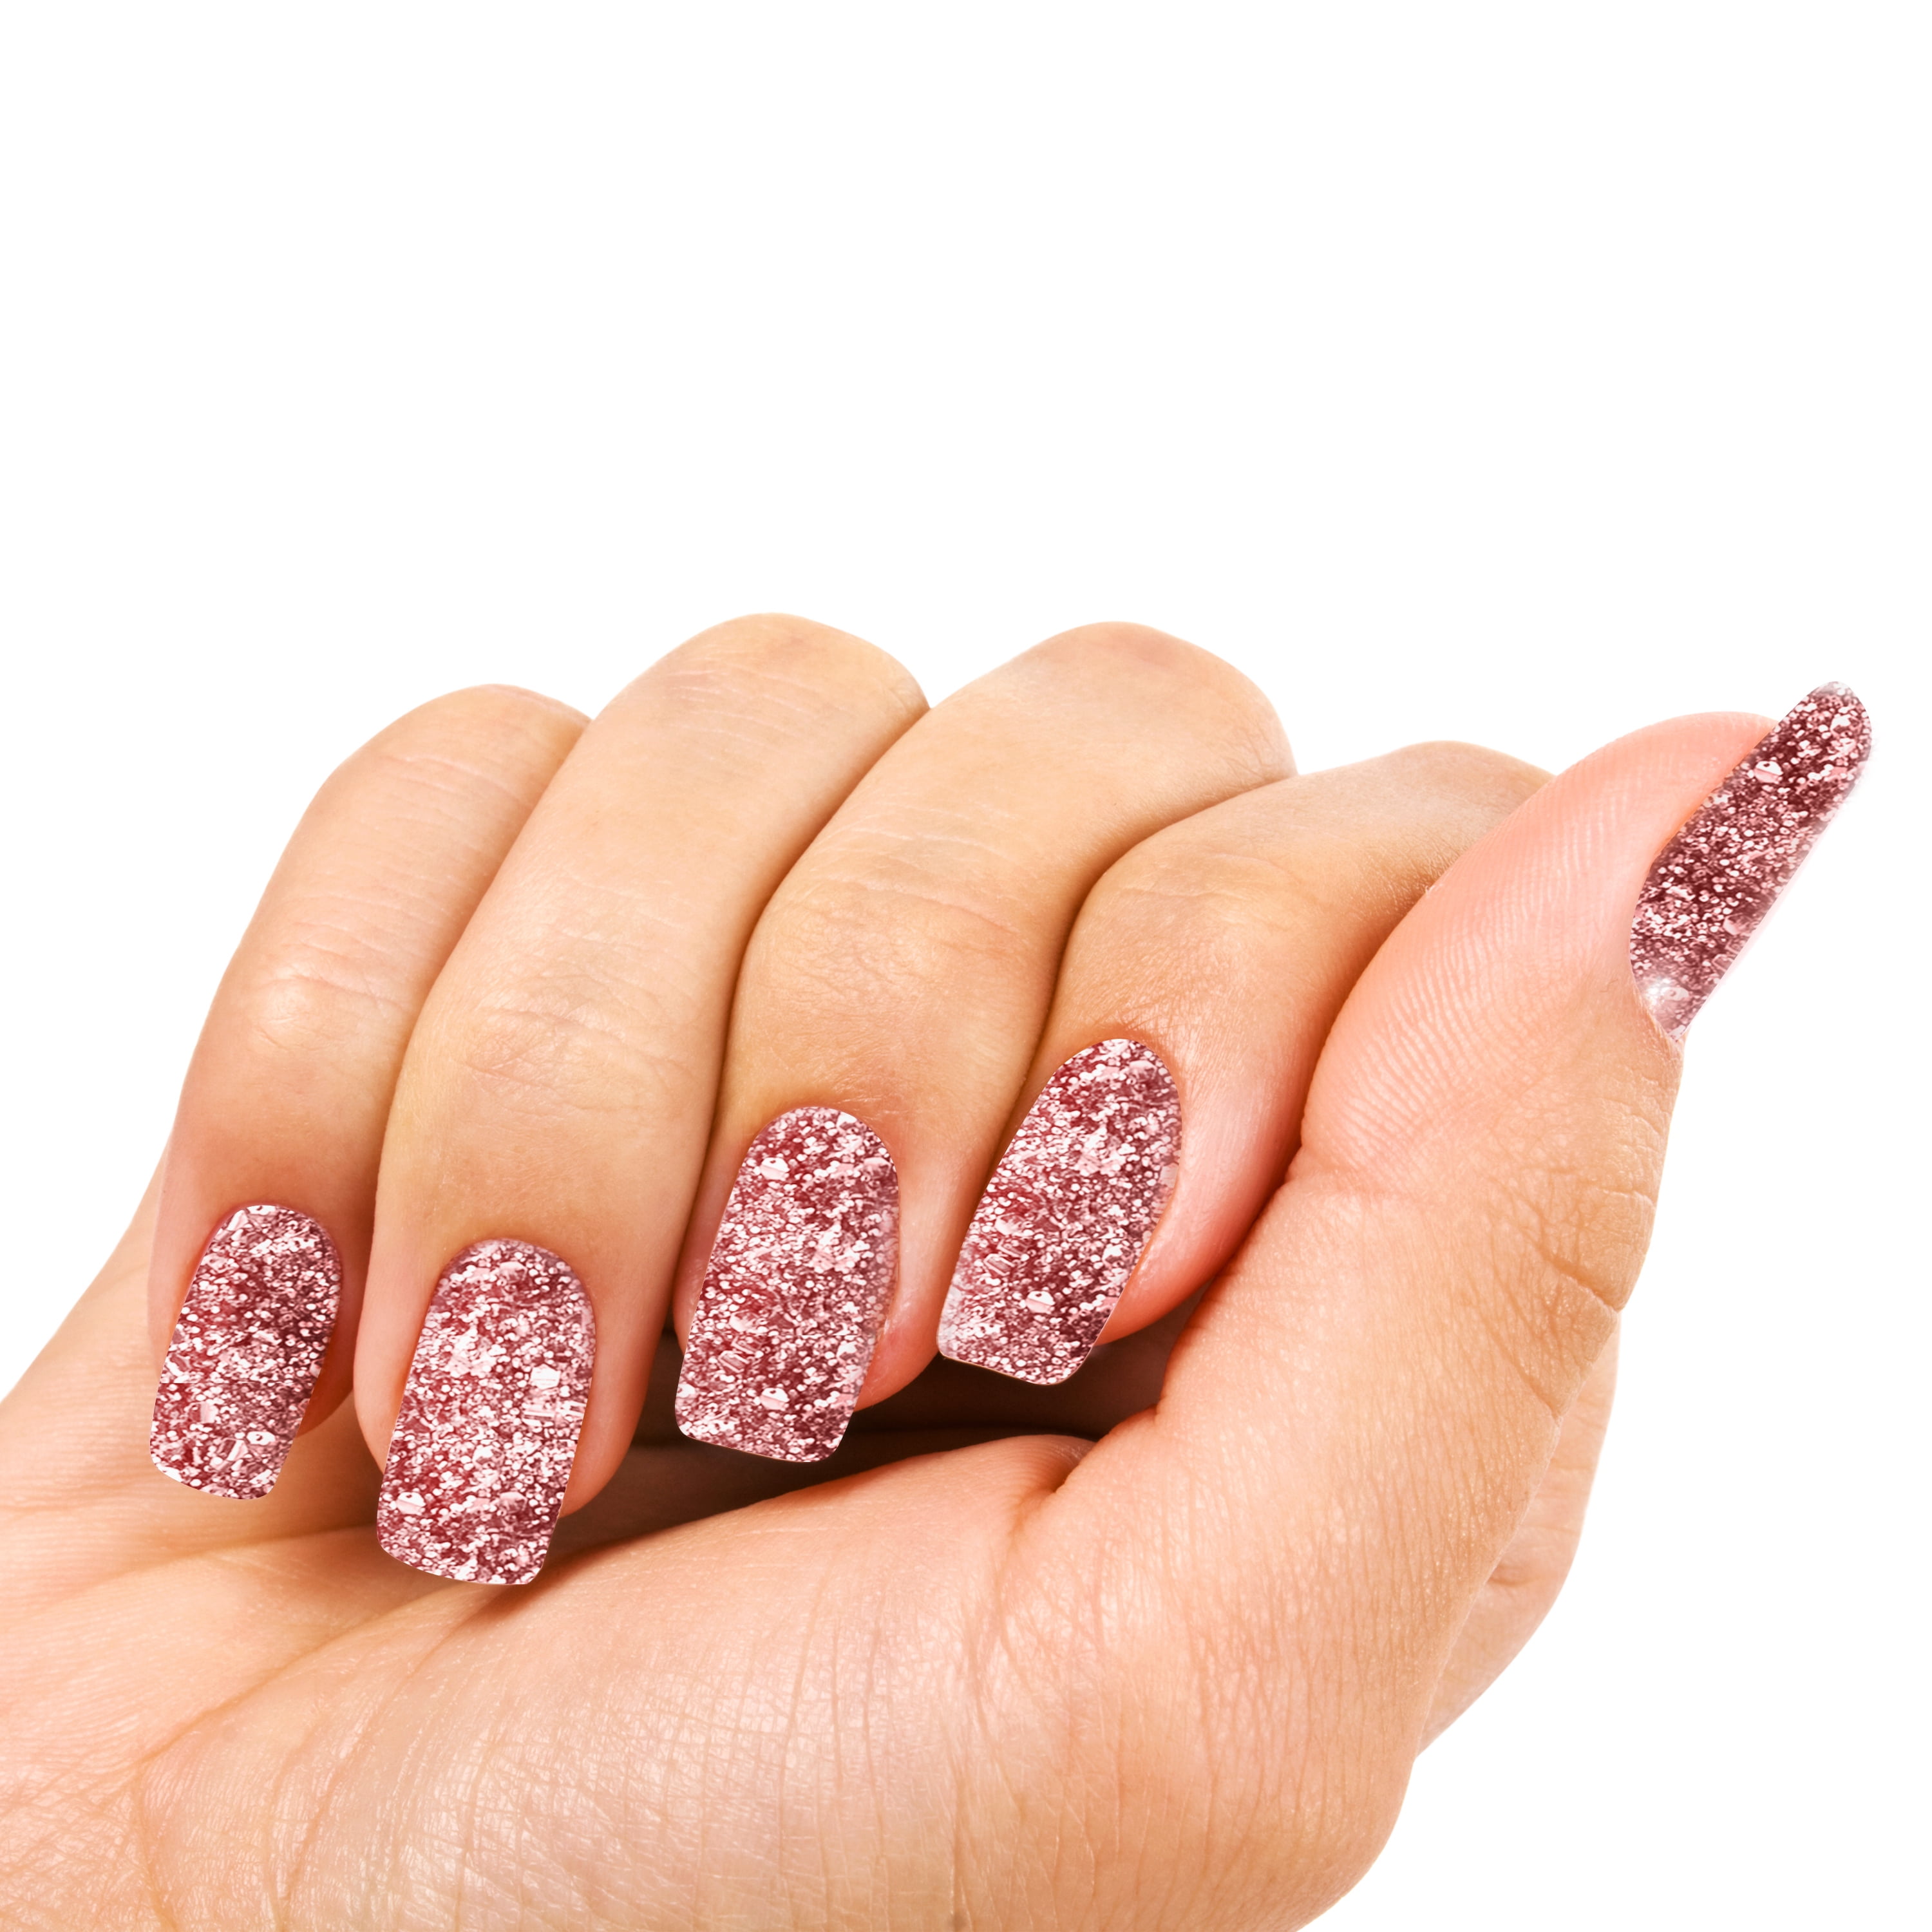 Spring Nails: Try a Pretty Blush Take on the Multi-Colored Nails Trend